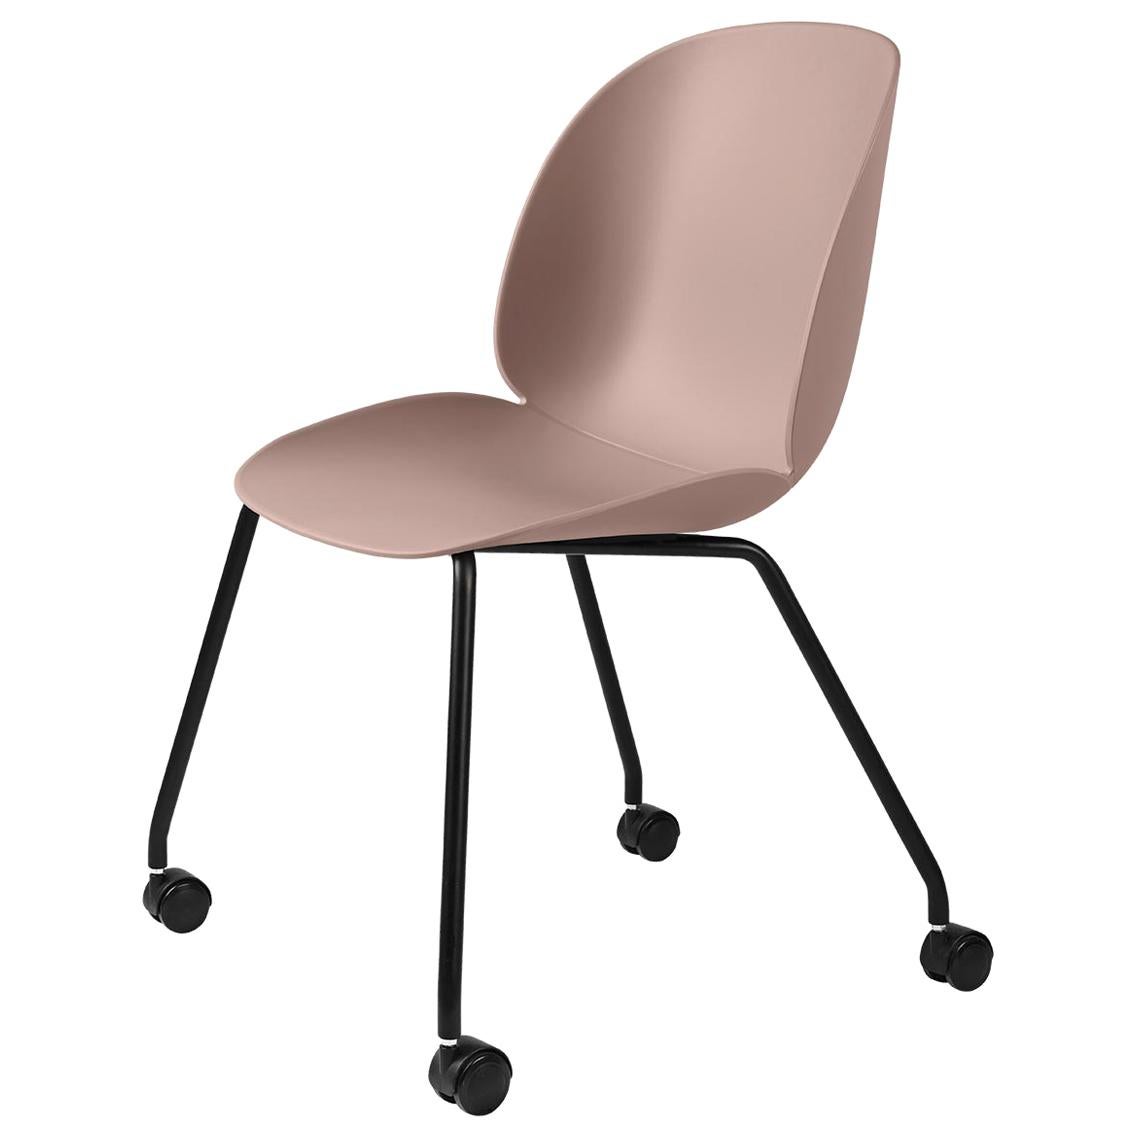 Beetle Meeting Chair, Un-Upholstered, 4 Legs with Castors